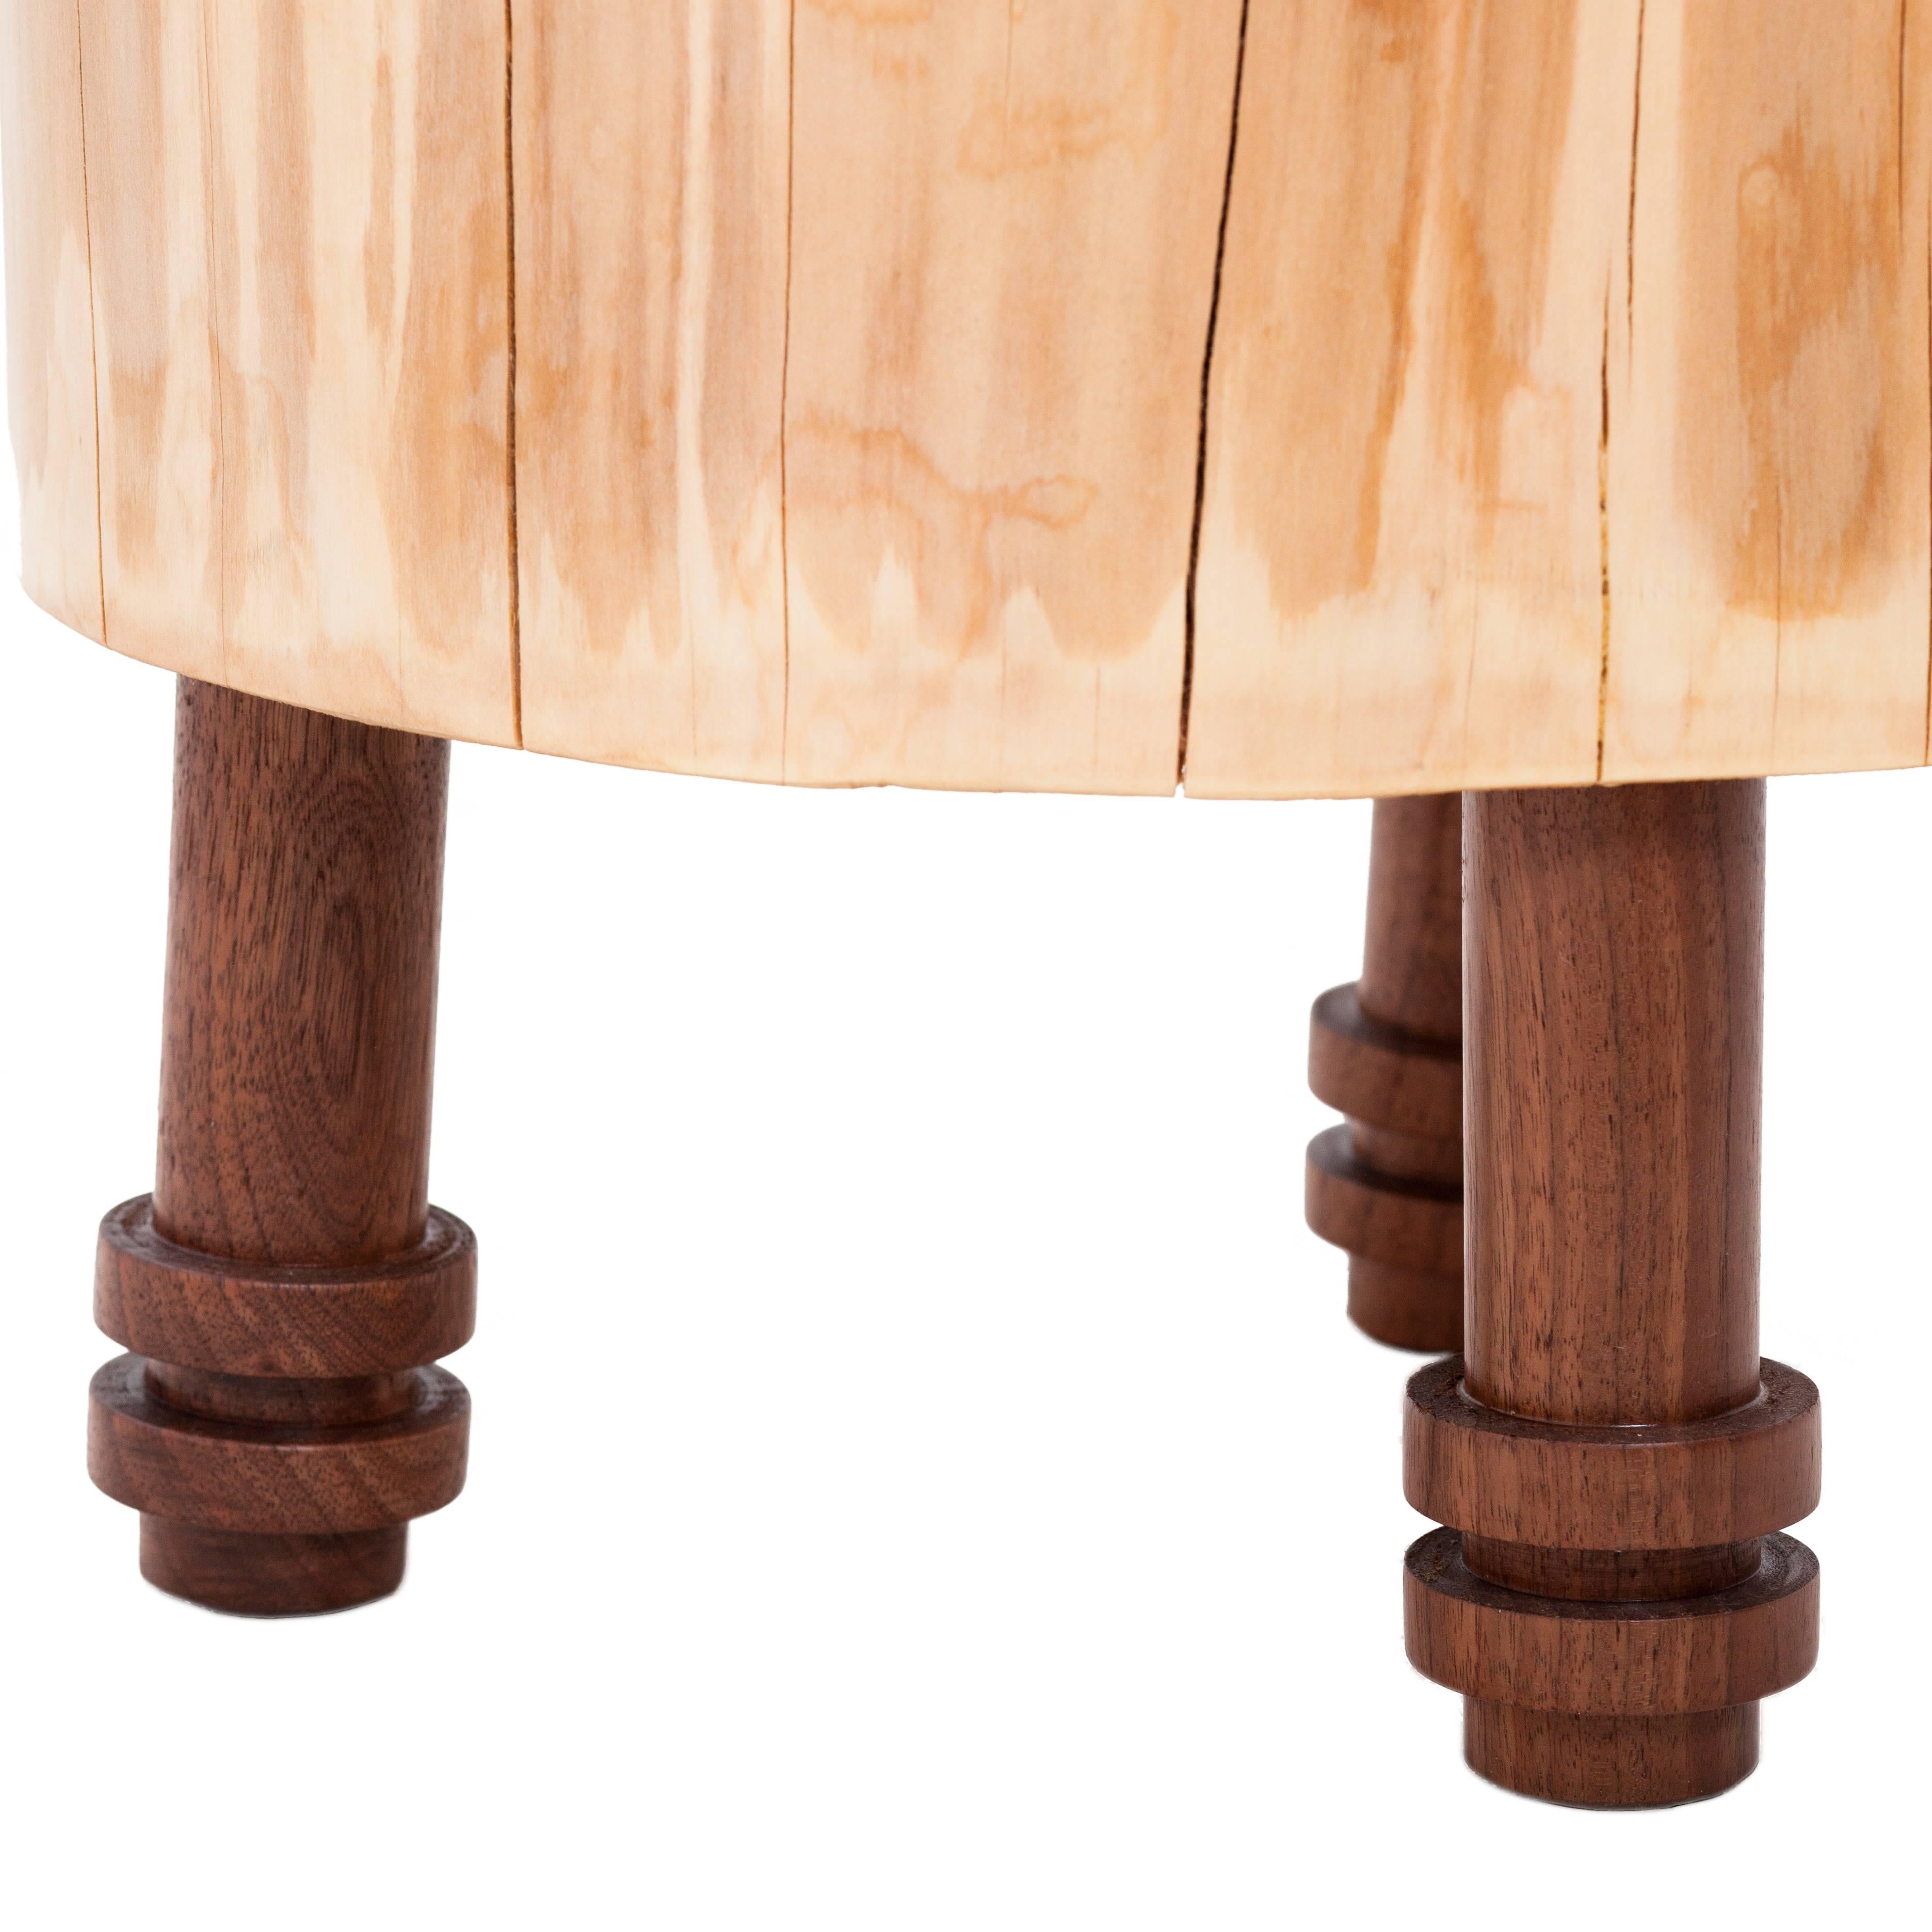 Reclaimed Salvaged Hurricane Sandy Stump Stools with Hand-Turned Legs & Drawers 1